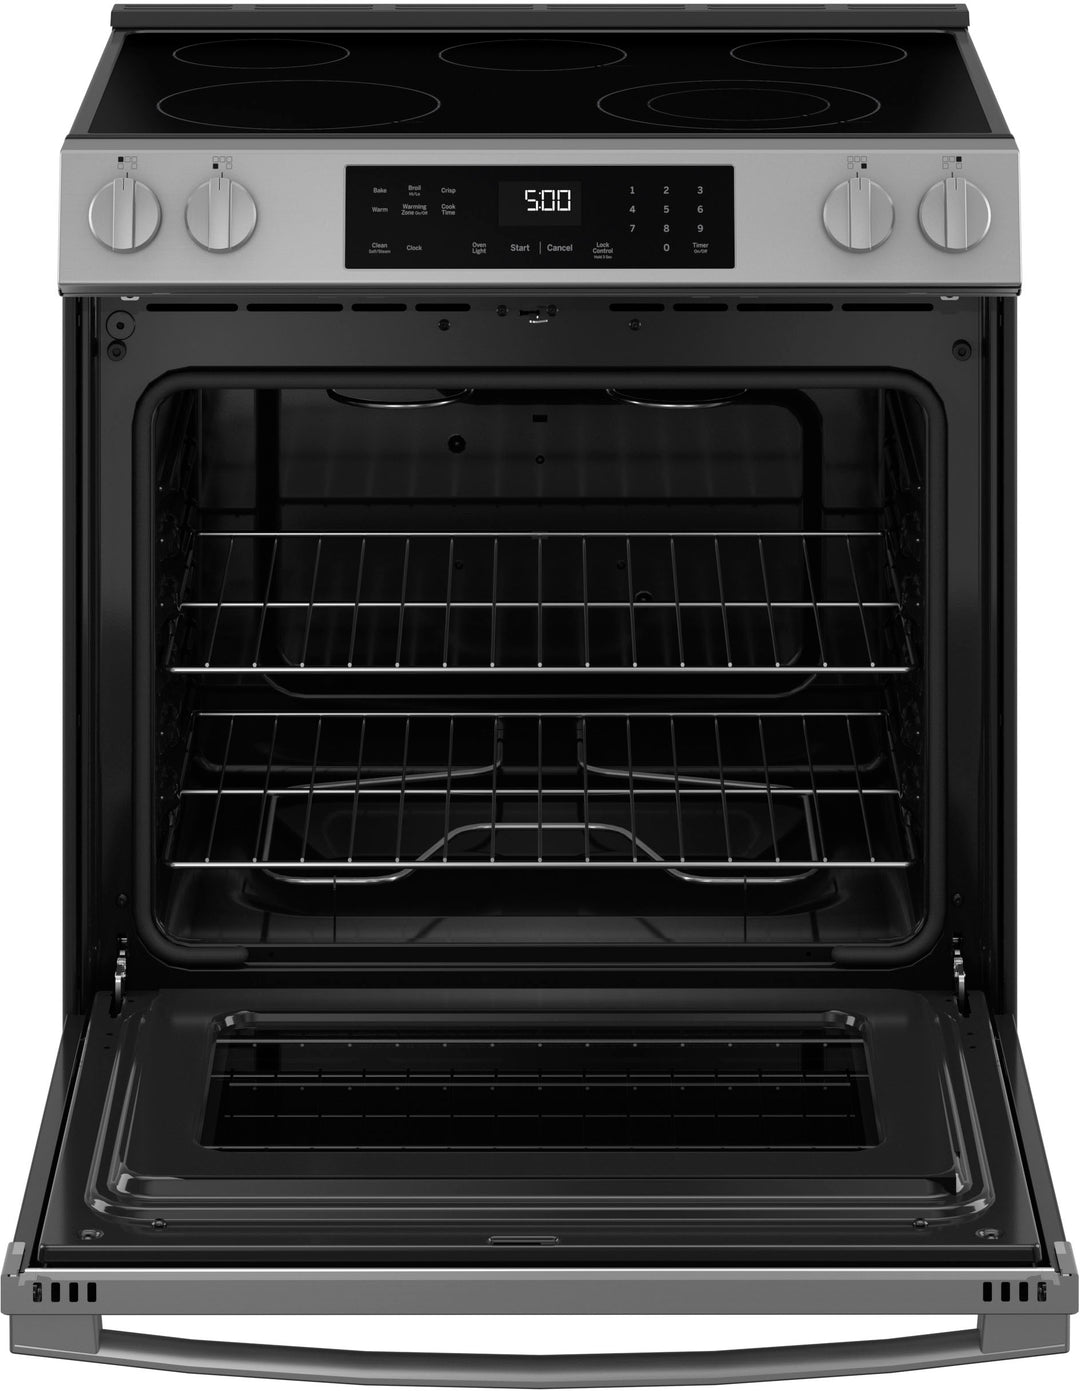 GE - 5.3 Cu. Ft. Slide-In Electric Range with Self-Clean and Steam Cleaning Option and Crisp Mode - Stainless Steel_5